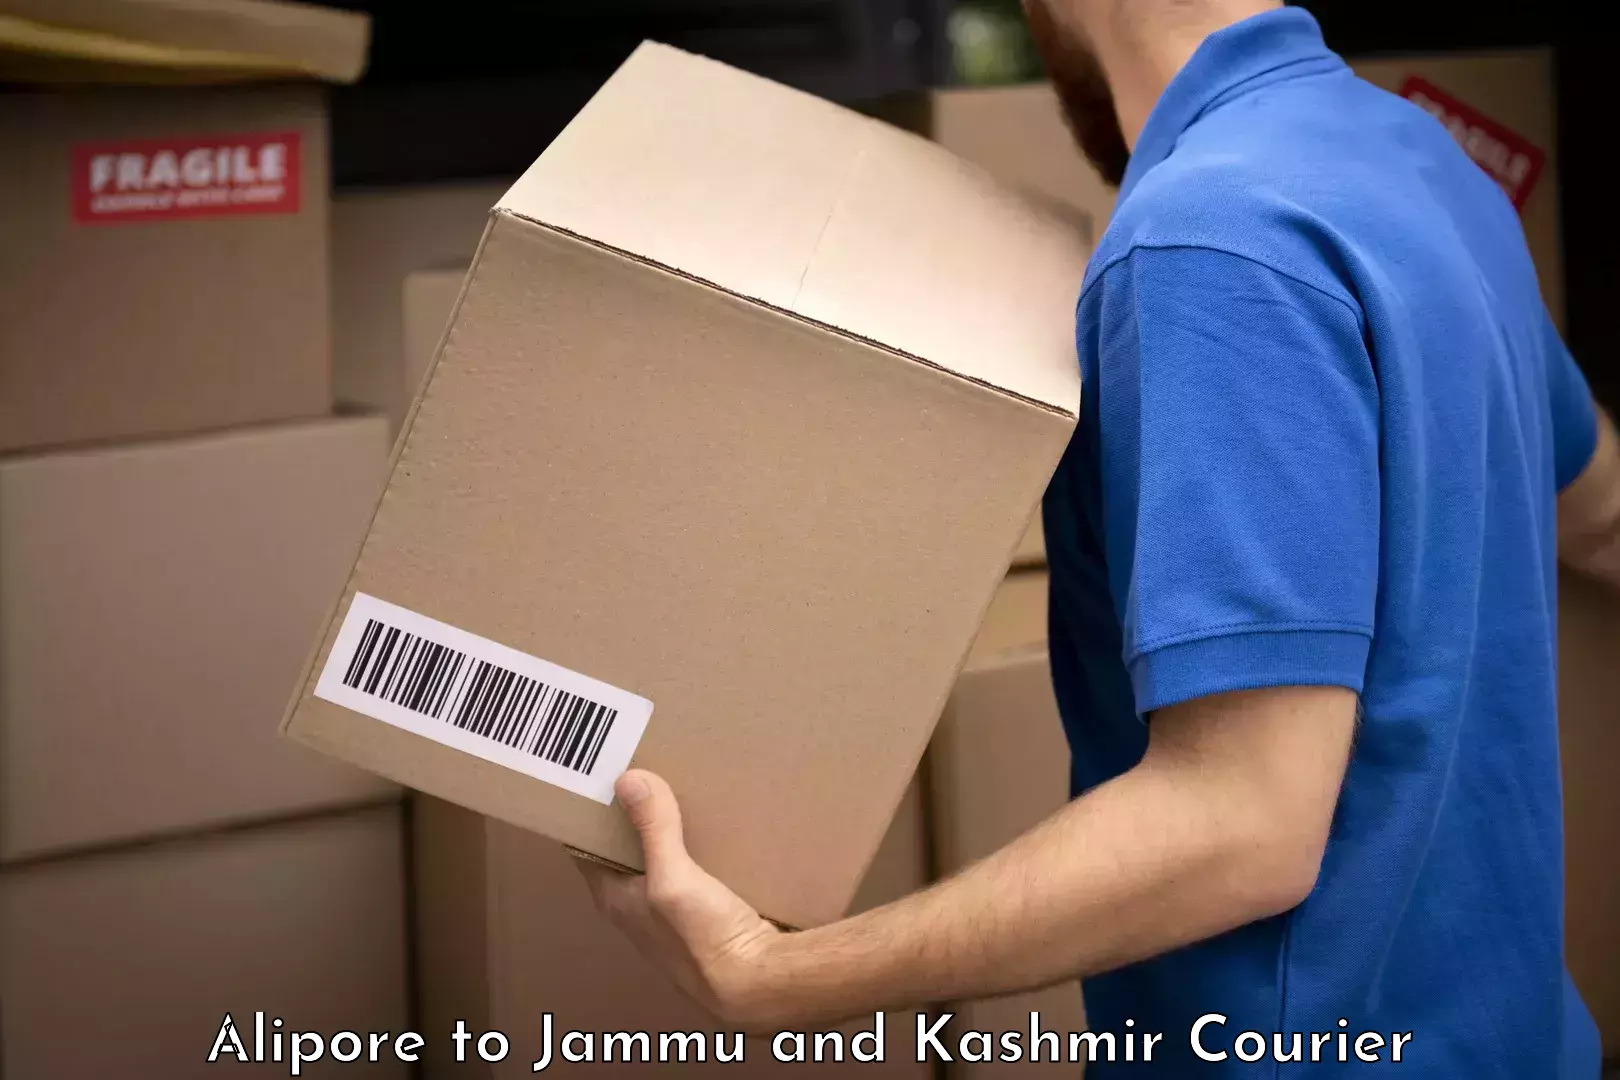 Baggage transport network Alipore to Jammu and Kashmir